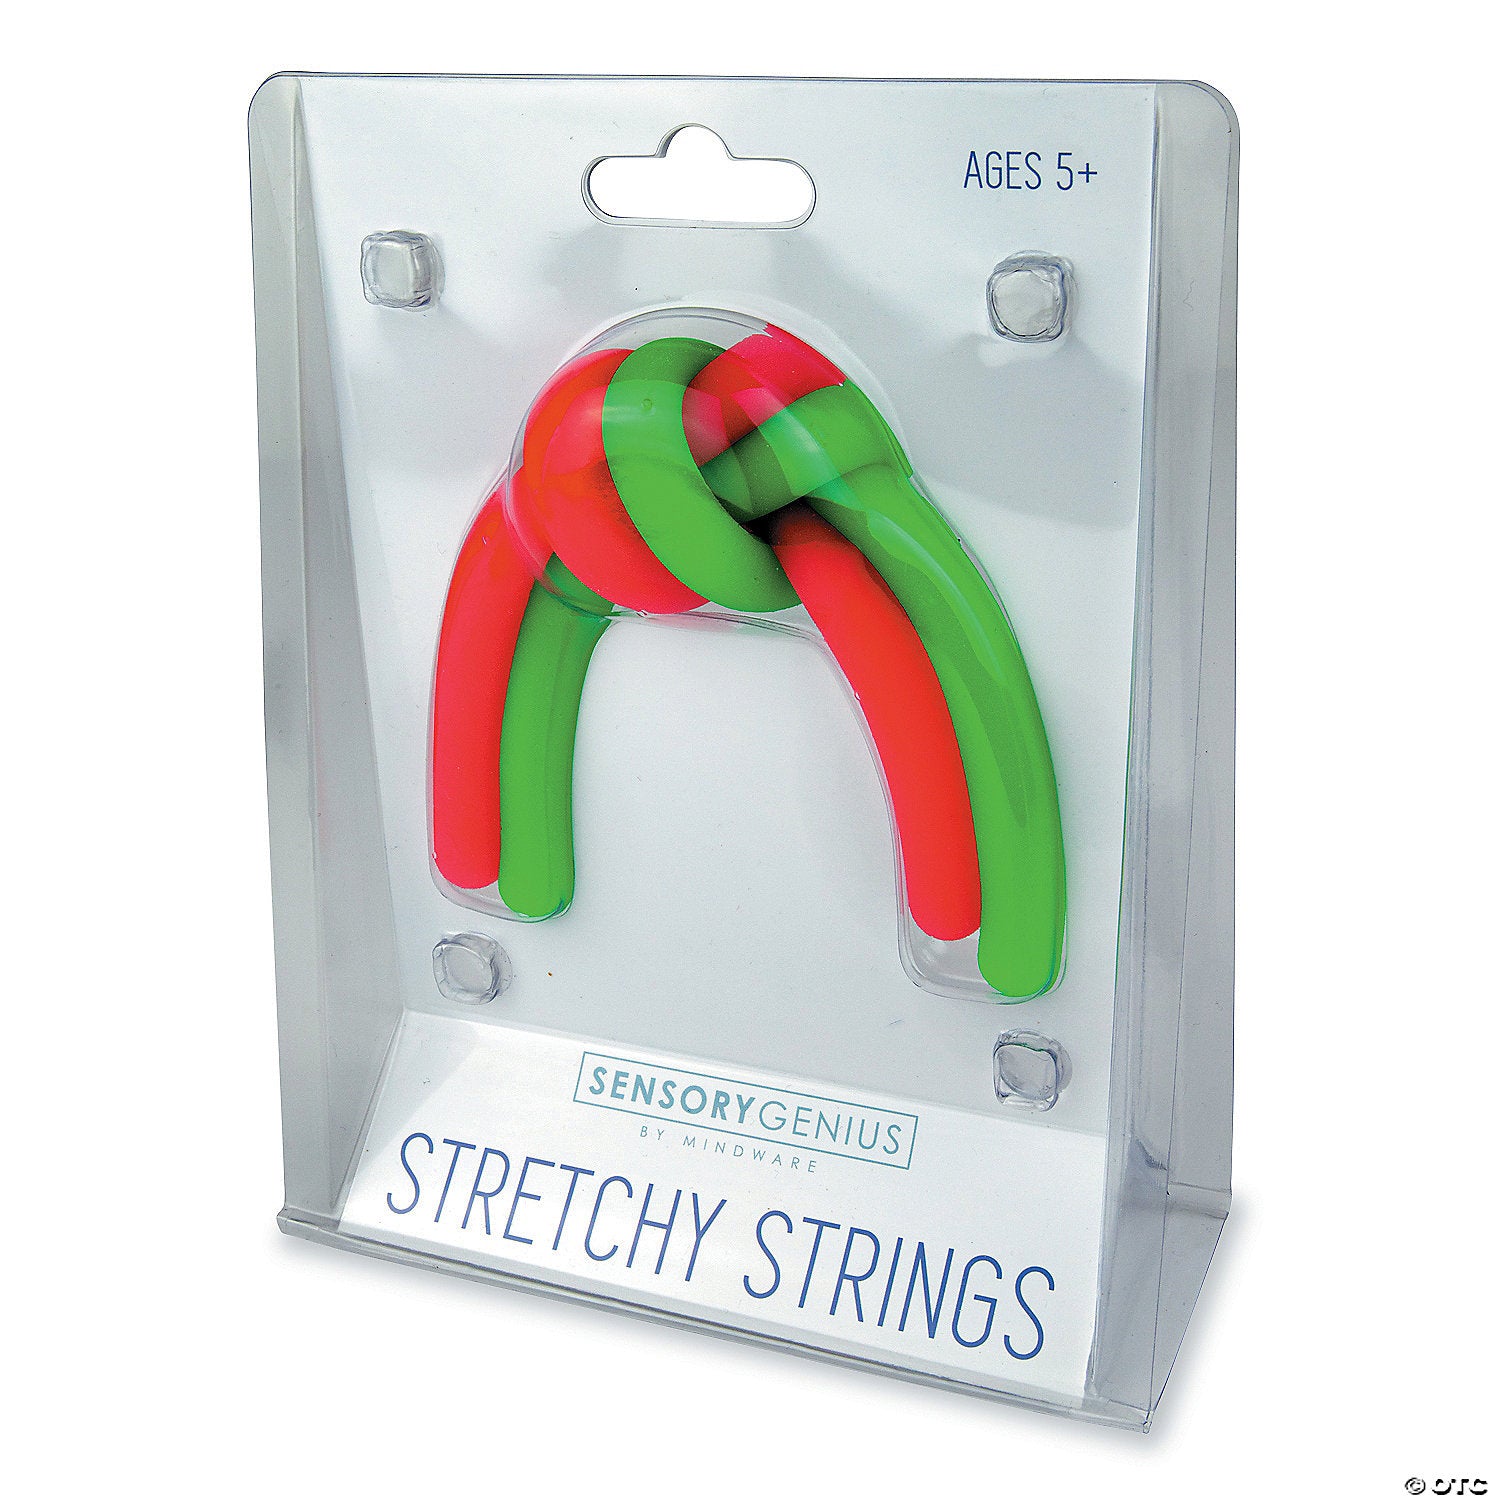 The product package for Stretchy Strings.